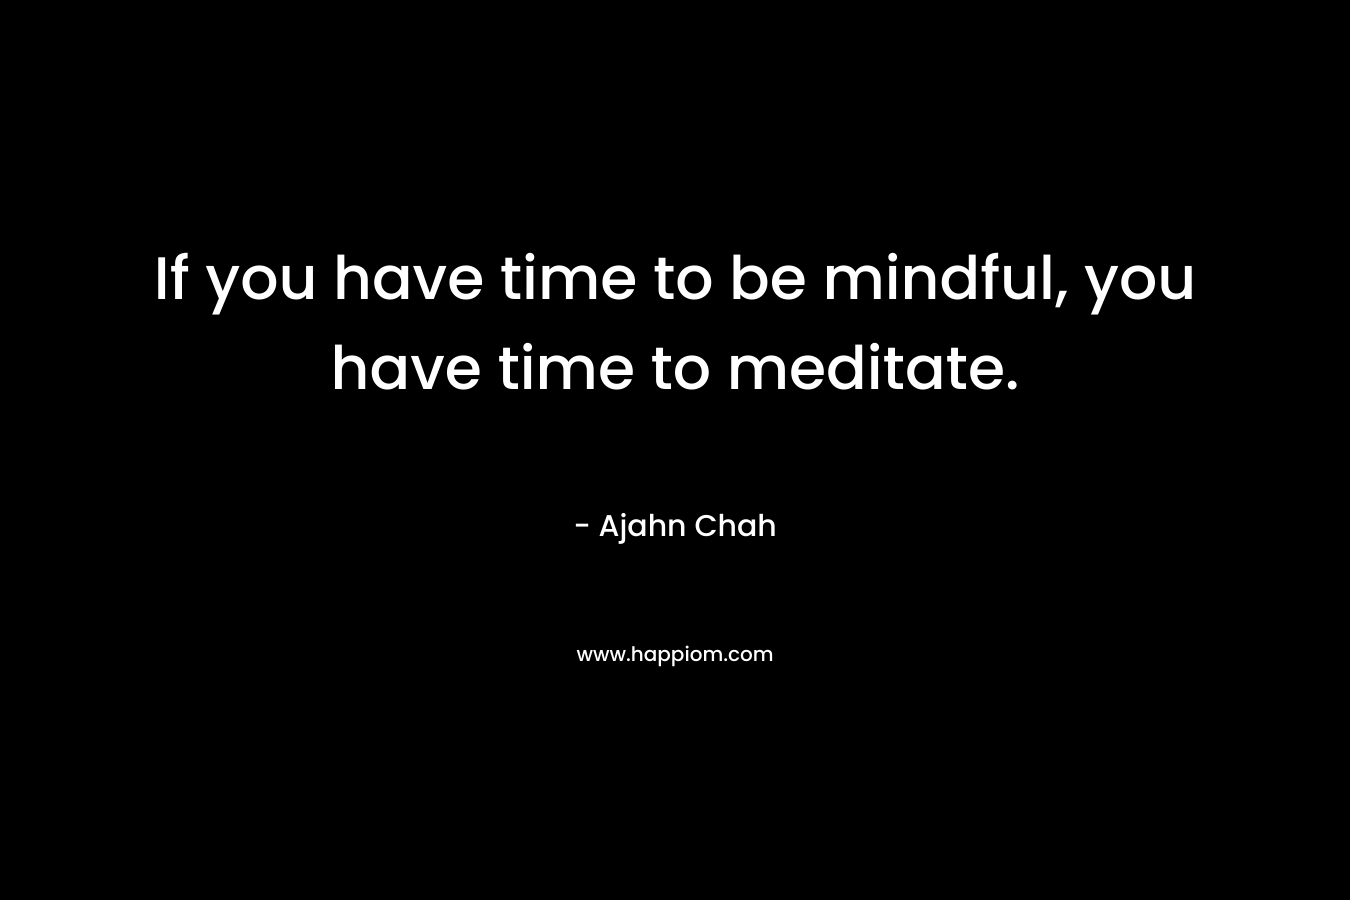 If you have time to be mindful, you have time to meditate.